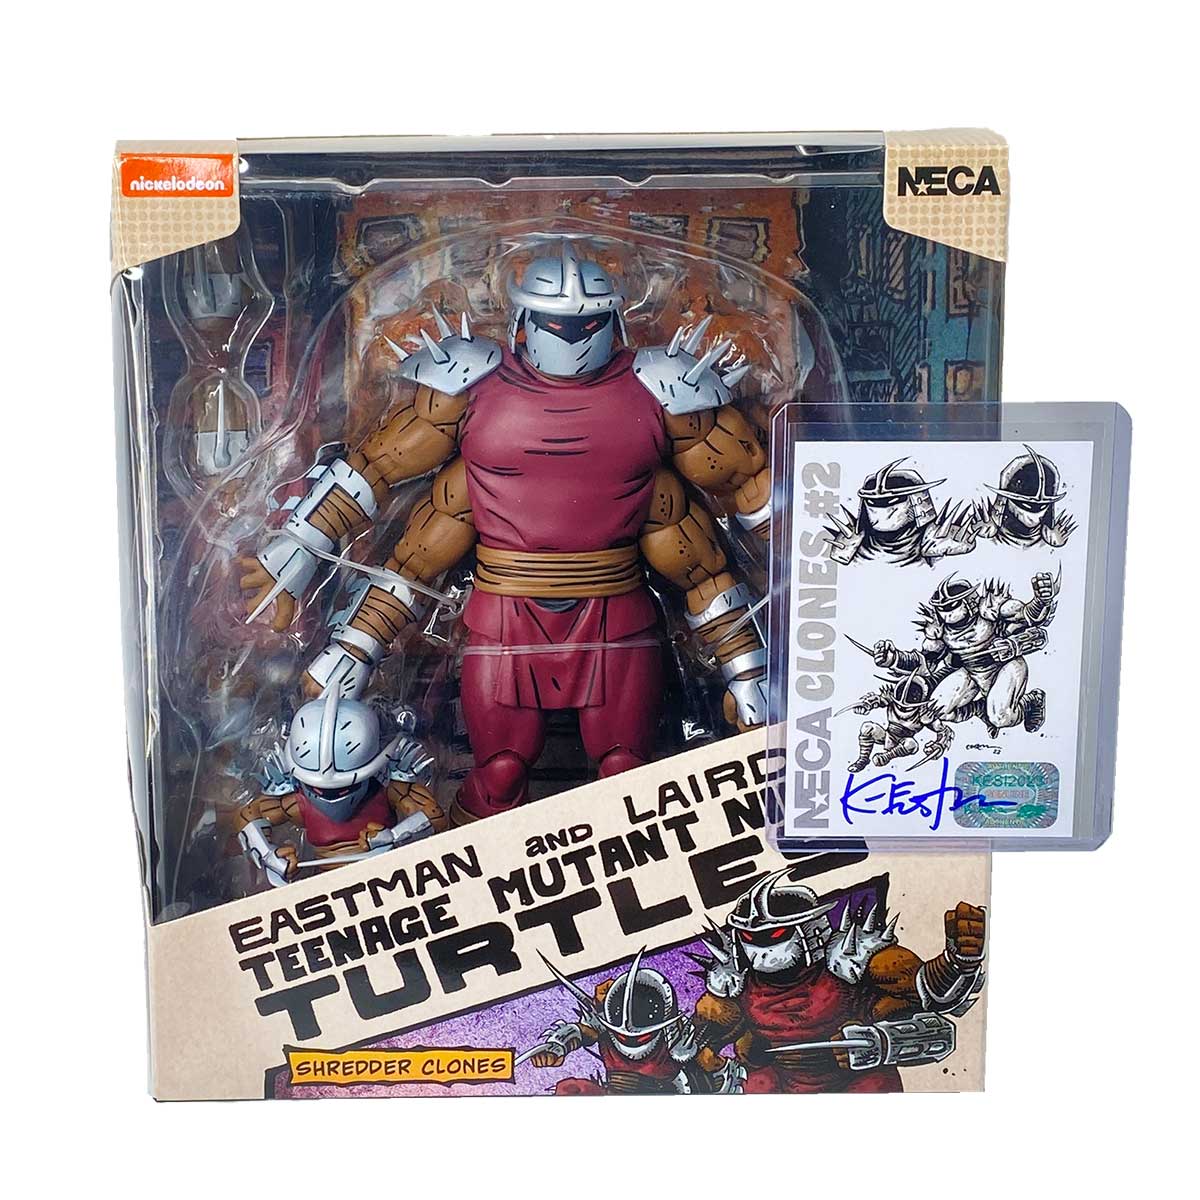 More New Stunning NECA Figures and Hand Signed Art Cards